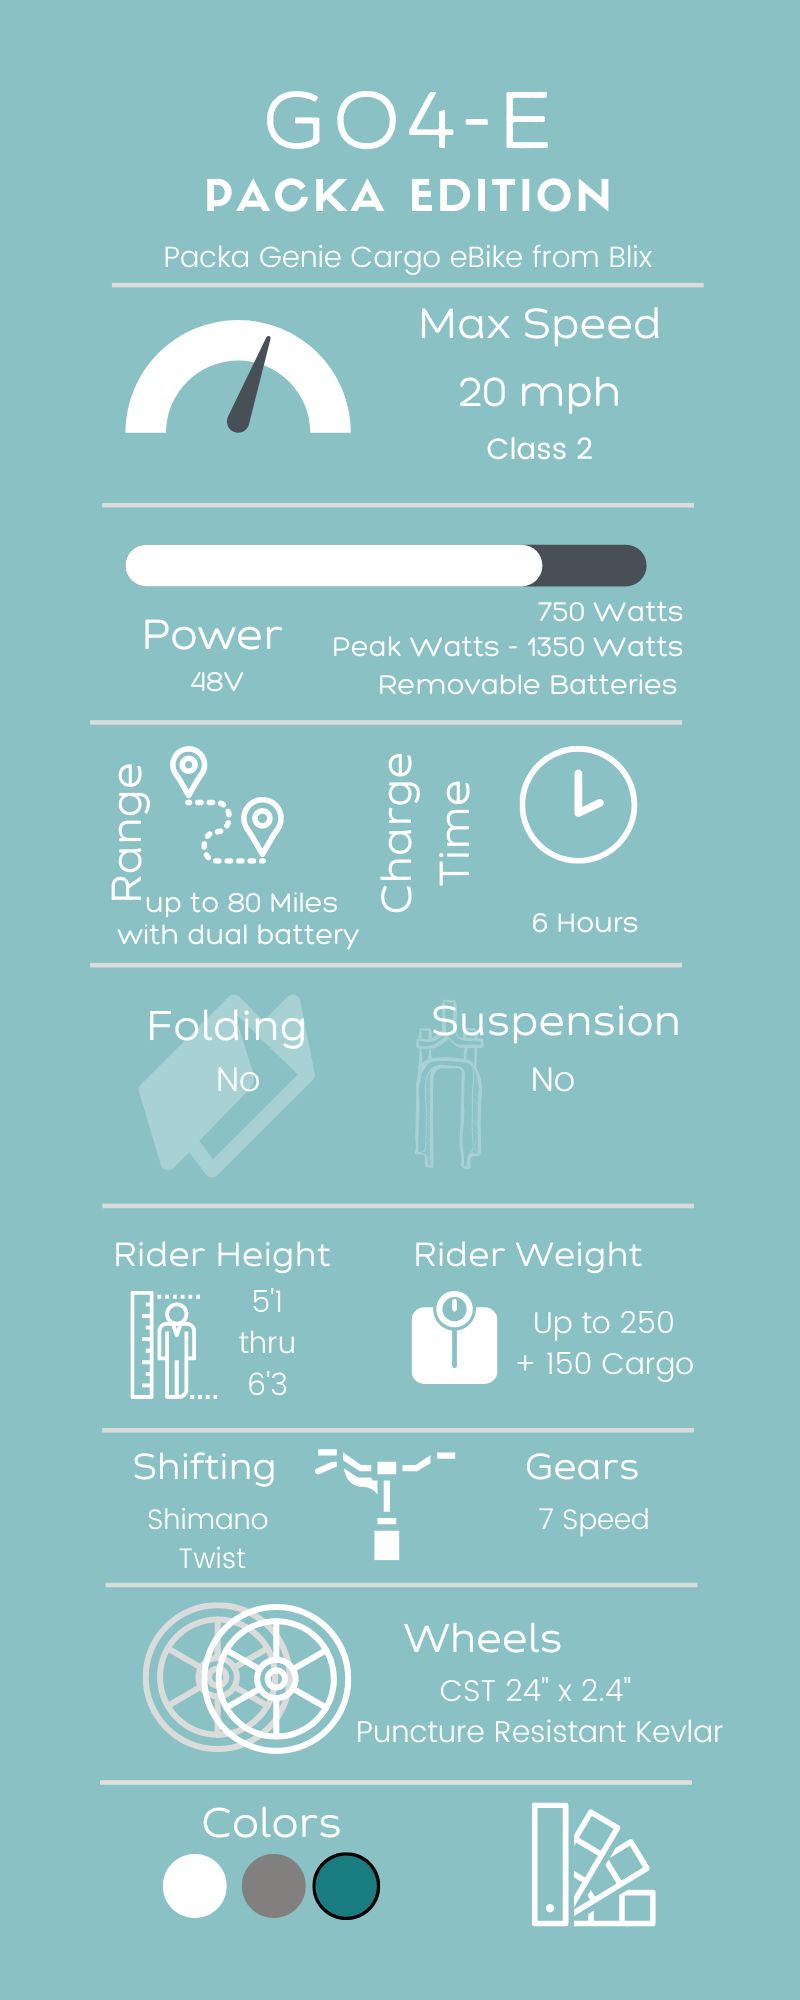 Infographic about the Blix Packa Genie eBike that is compatible with the Go4-E Connection Kit to create a Blackbird Bikes Sociable Tandem side-by-side quadribike. This 4 wheel bicycle offers a stable ride inclusive for all abilities and adaptive to special needs riders.